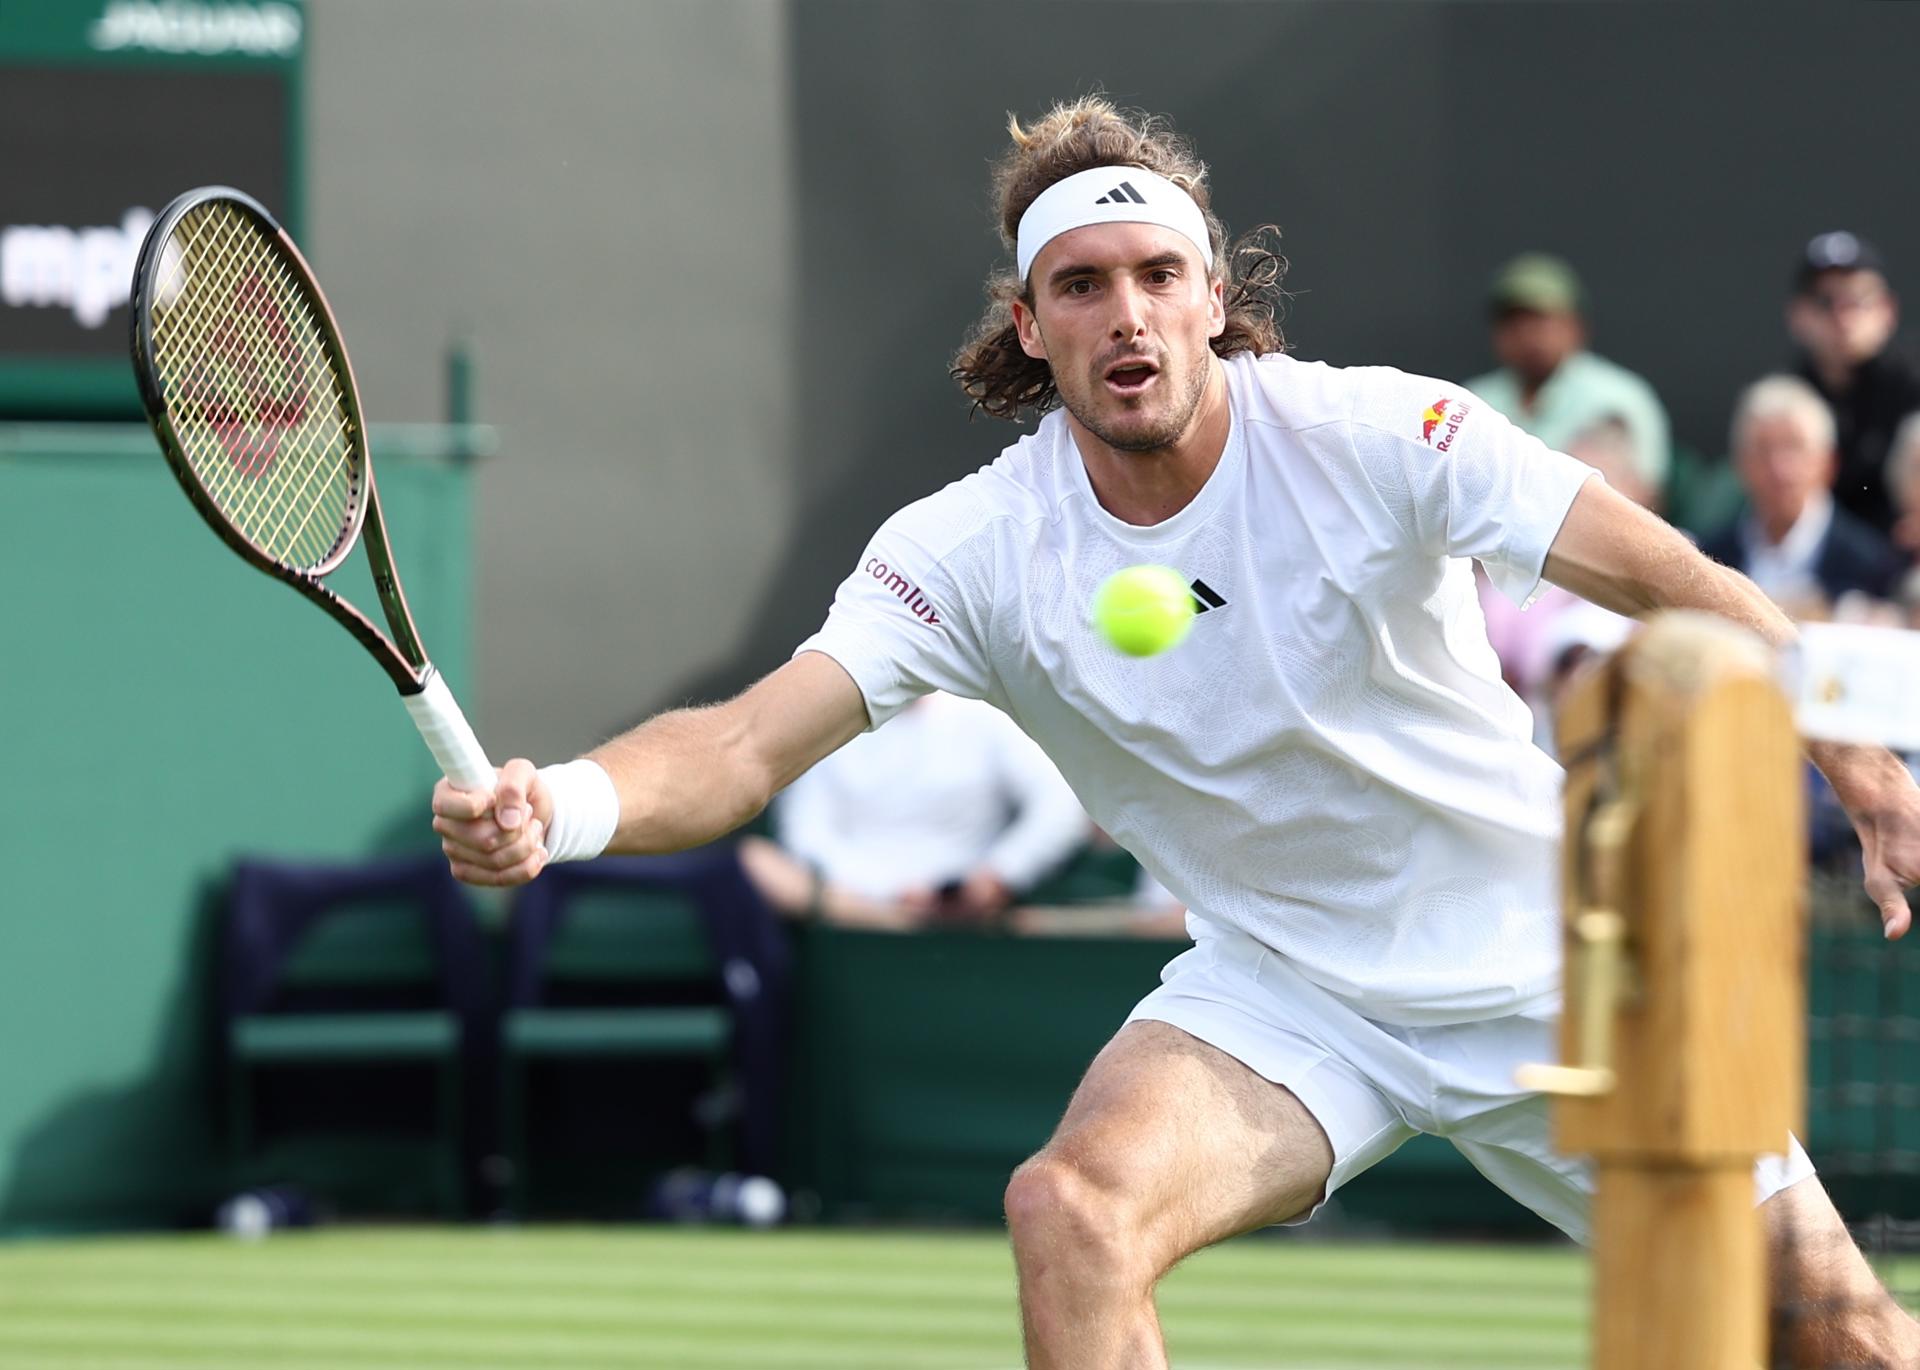 Stefanos Tsitsipas of Greece prepares to hit a forehand volley during his men's singles first-round match against Dominic Thiem of Austria at the Wimbledon Championships, Wimbledon, Britain, on 5 July 2023. Tsitsipas won 3-6, 7-6 (7-1), 6-2, 6-7 (5-7), 7-6 (10-8). EFE/EPA/ADAM VAUGHAN EDITORIAL USE ONLY
